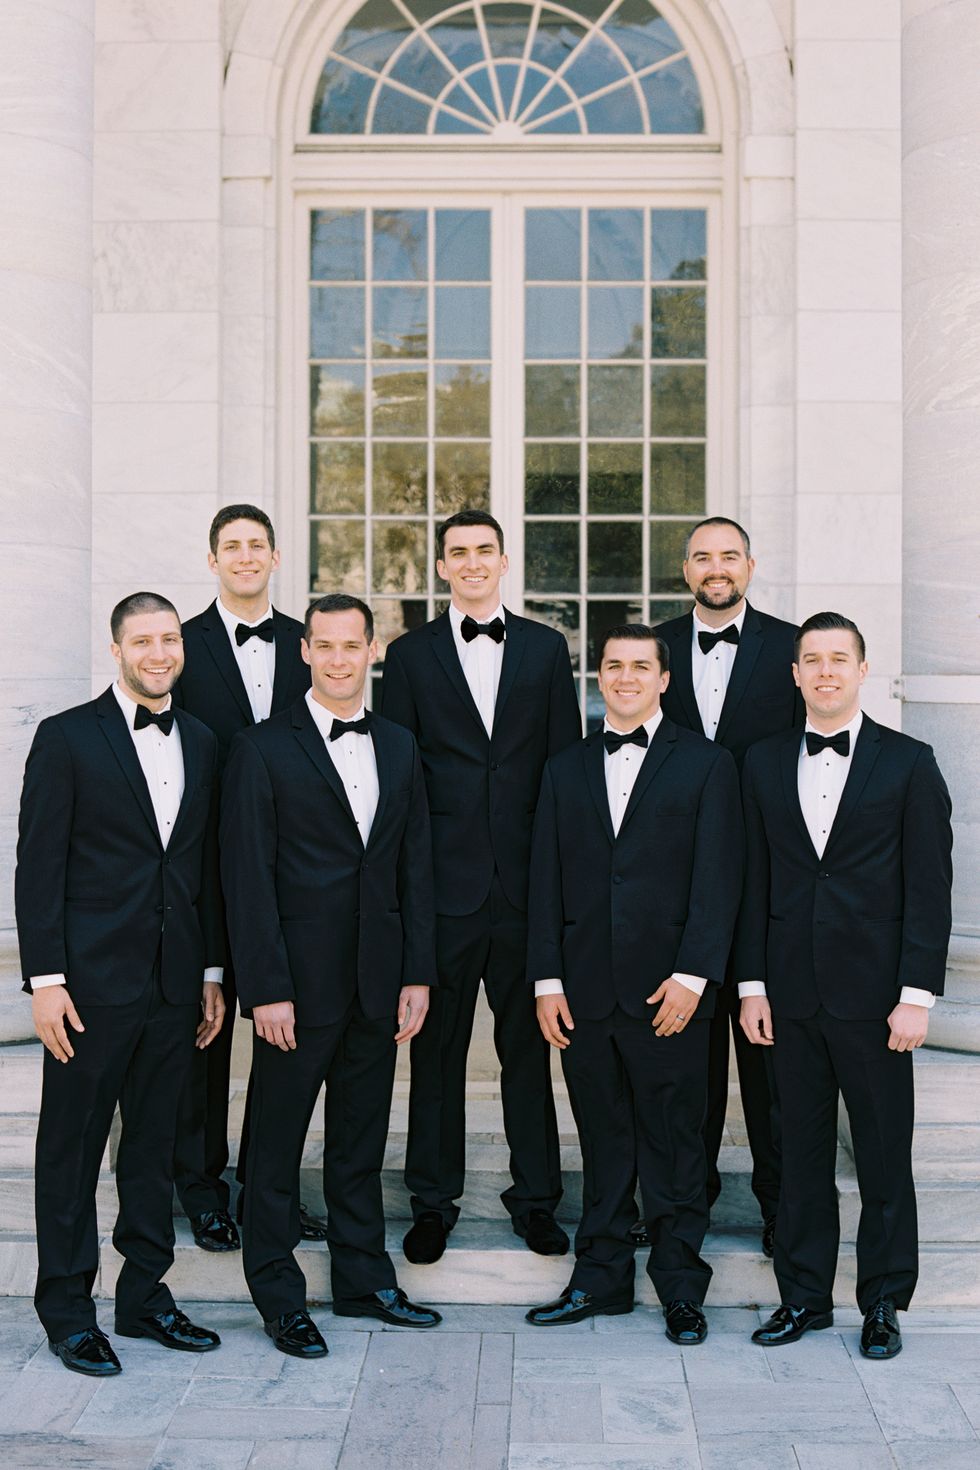 <p>Matt's groomsmen, including his brother, Arielle's two brothers, and his three best friends, looked sharp in their tuxedos from <a href="https://tuxedo.menswearhouse.com/verawang.do" target="_blank" tabindex="-1">Vera Wang</a>.</p>